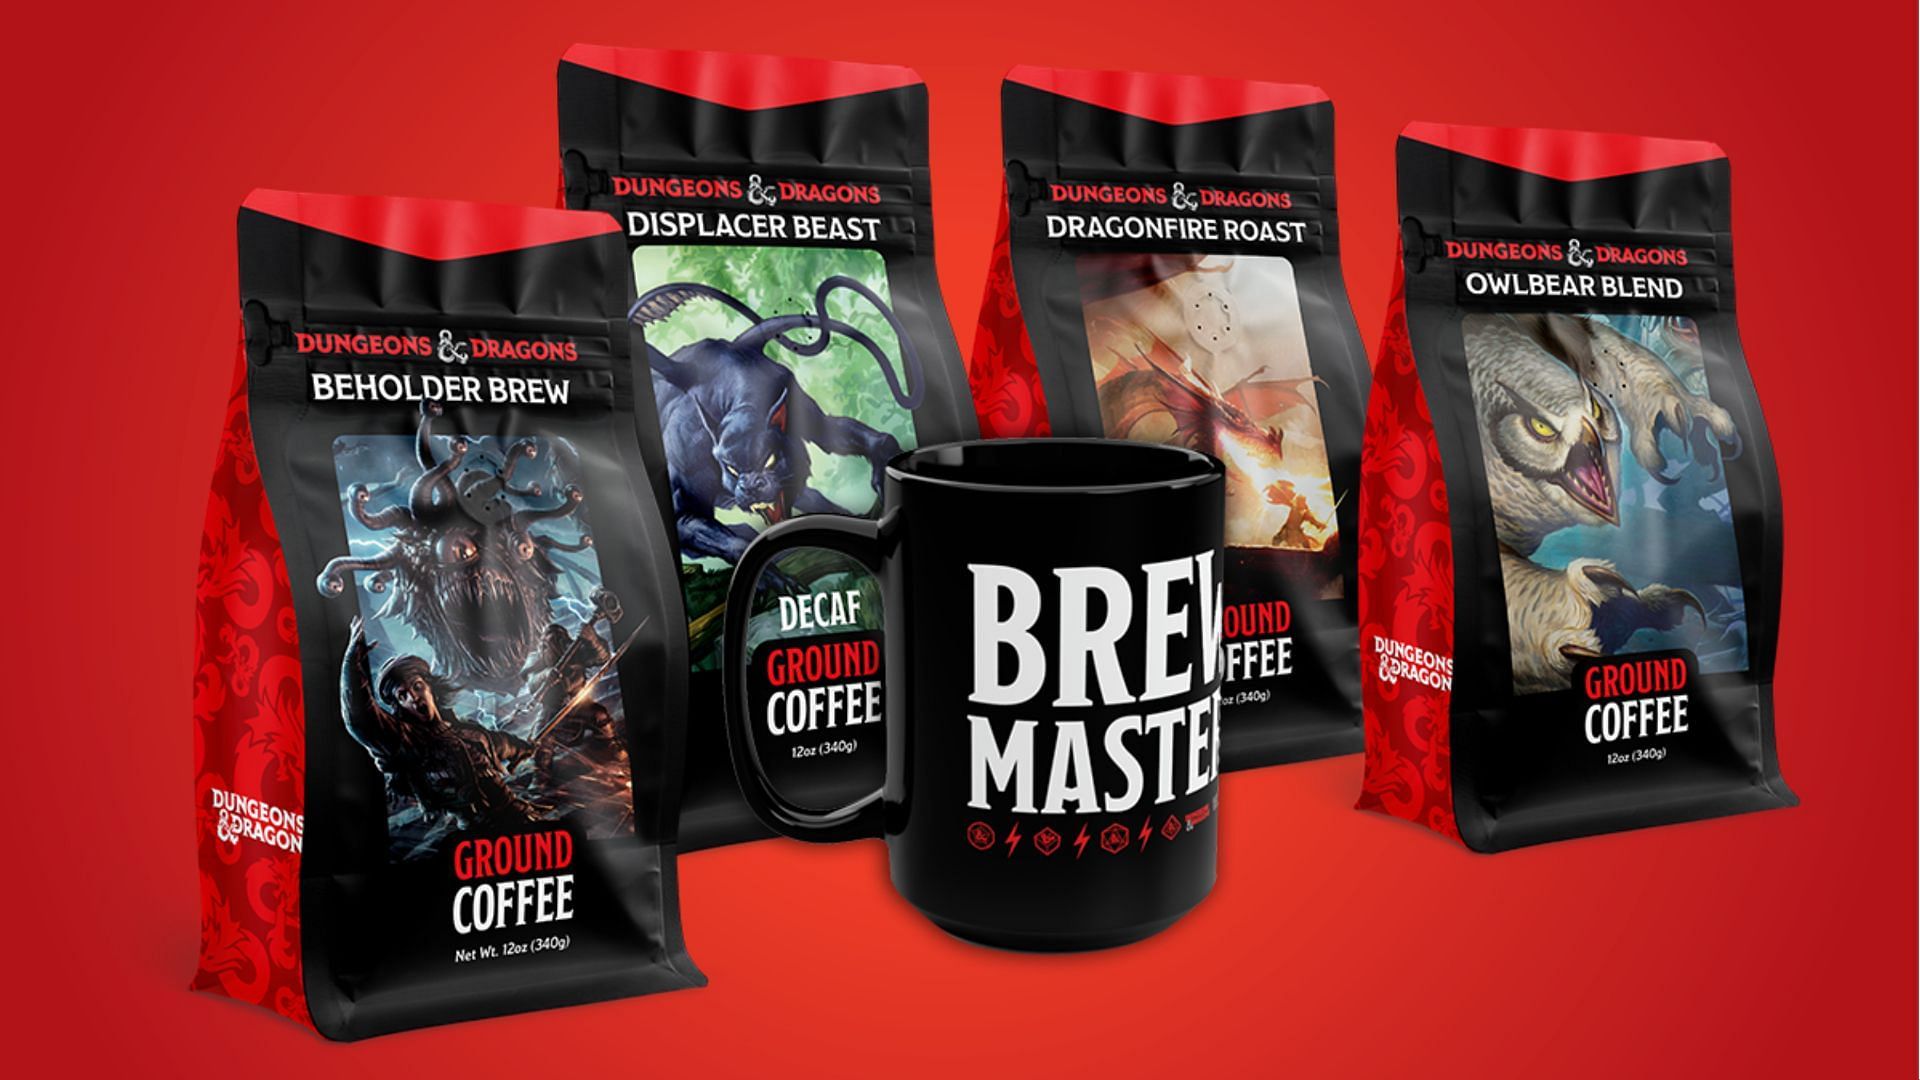 Hasbro-owned Dungeons &amp; Dragons franchisee launches the new Dungeons &amp; Dragons Coffee Club (Image via Dungeons &amp; Dragons Coffee)